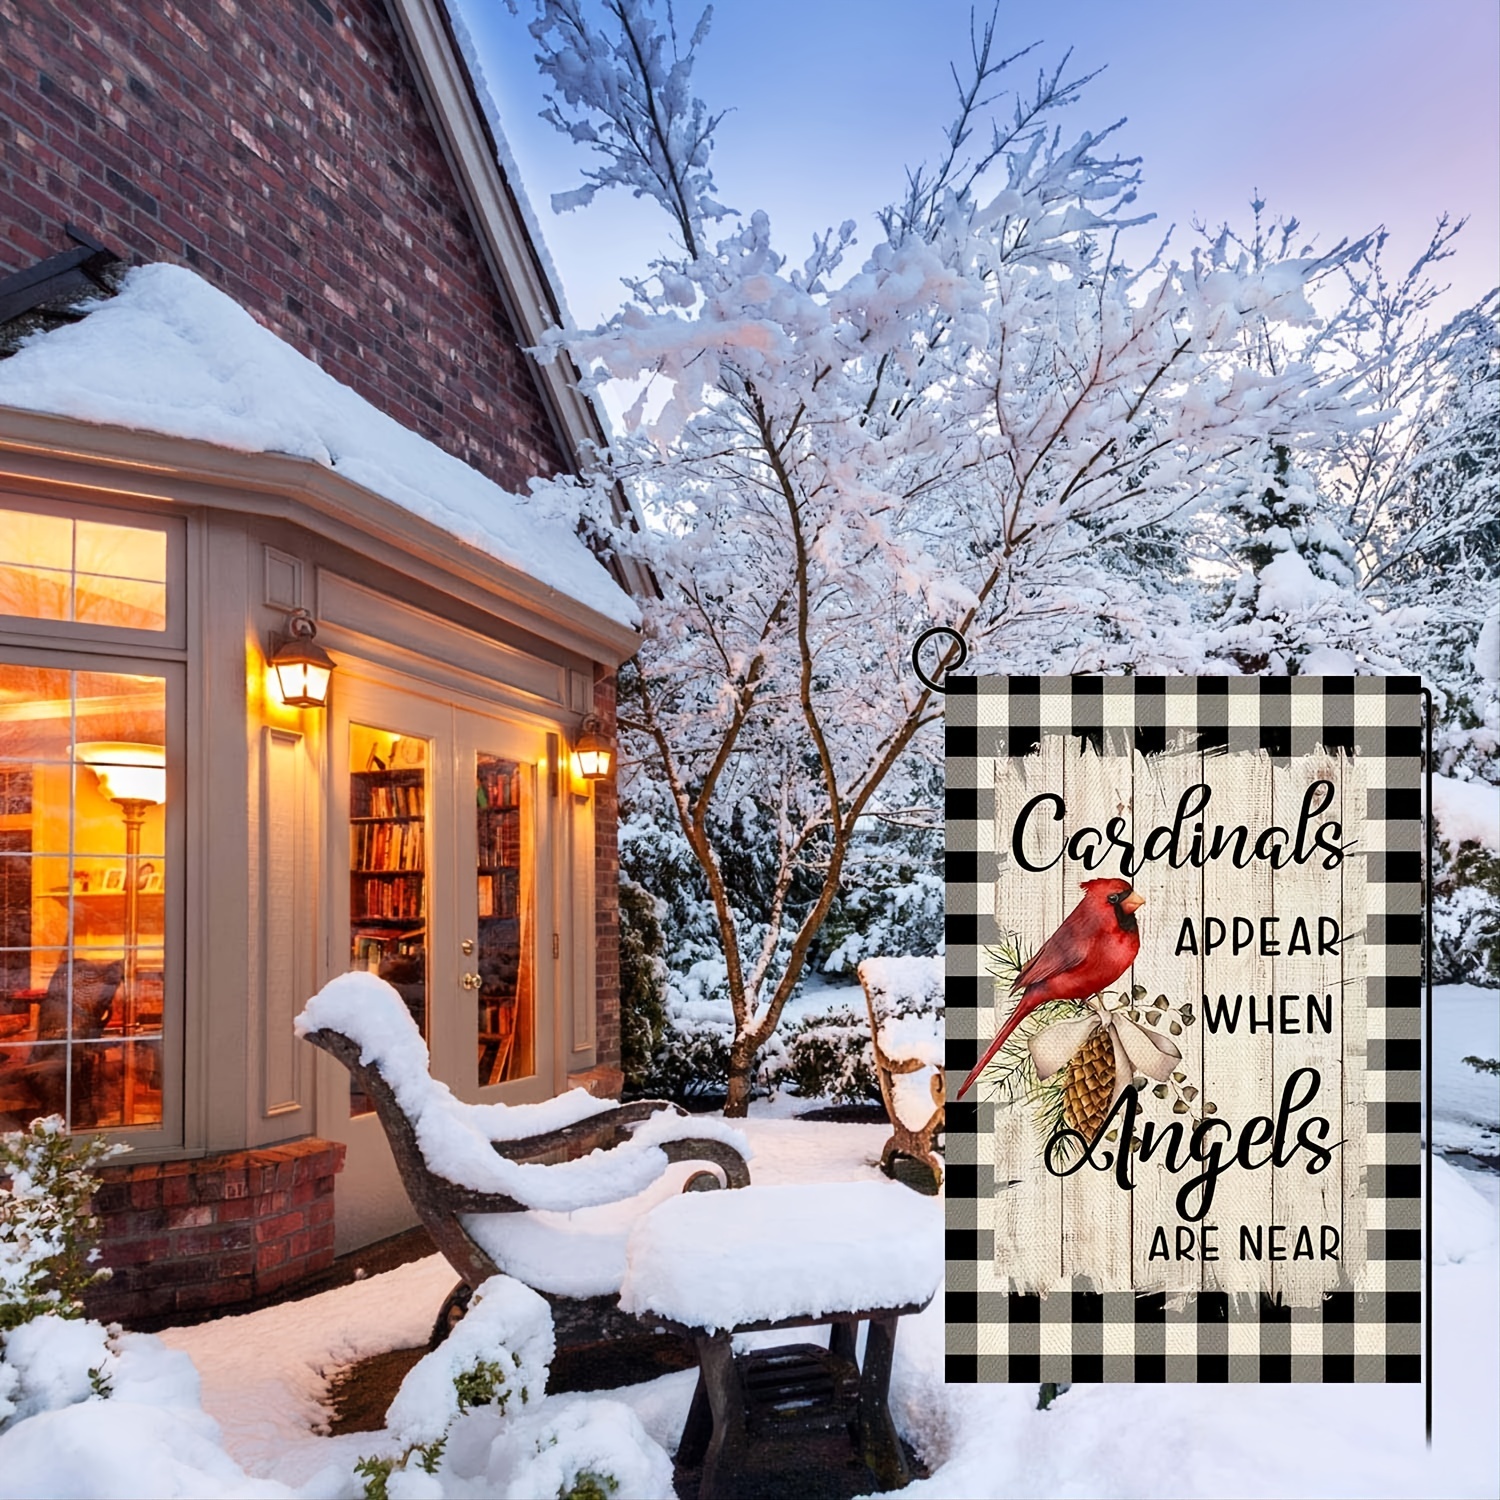 1pc winter decorative garden flag double sided red bird snowflake quote memorial gift outdoor small decor christmas farmhouse home outside decoration no flagpole 12x18 inches details 2